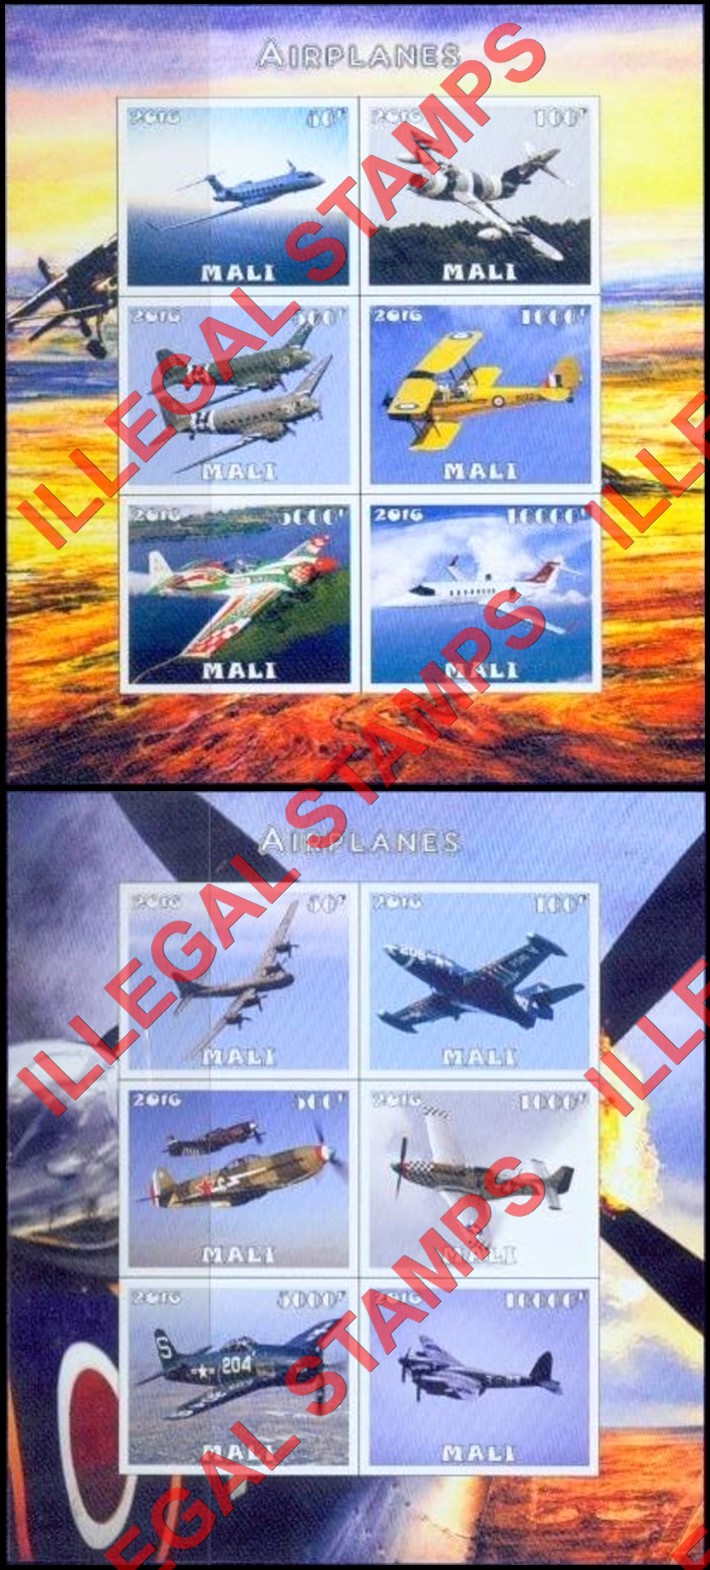 Mali 2016 Airplanes Illegal Stamp Souvenir Sheets of 6 (Part 1)